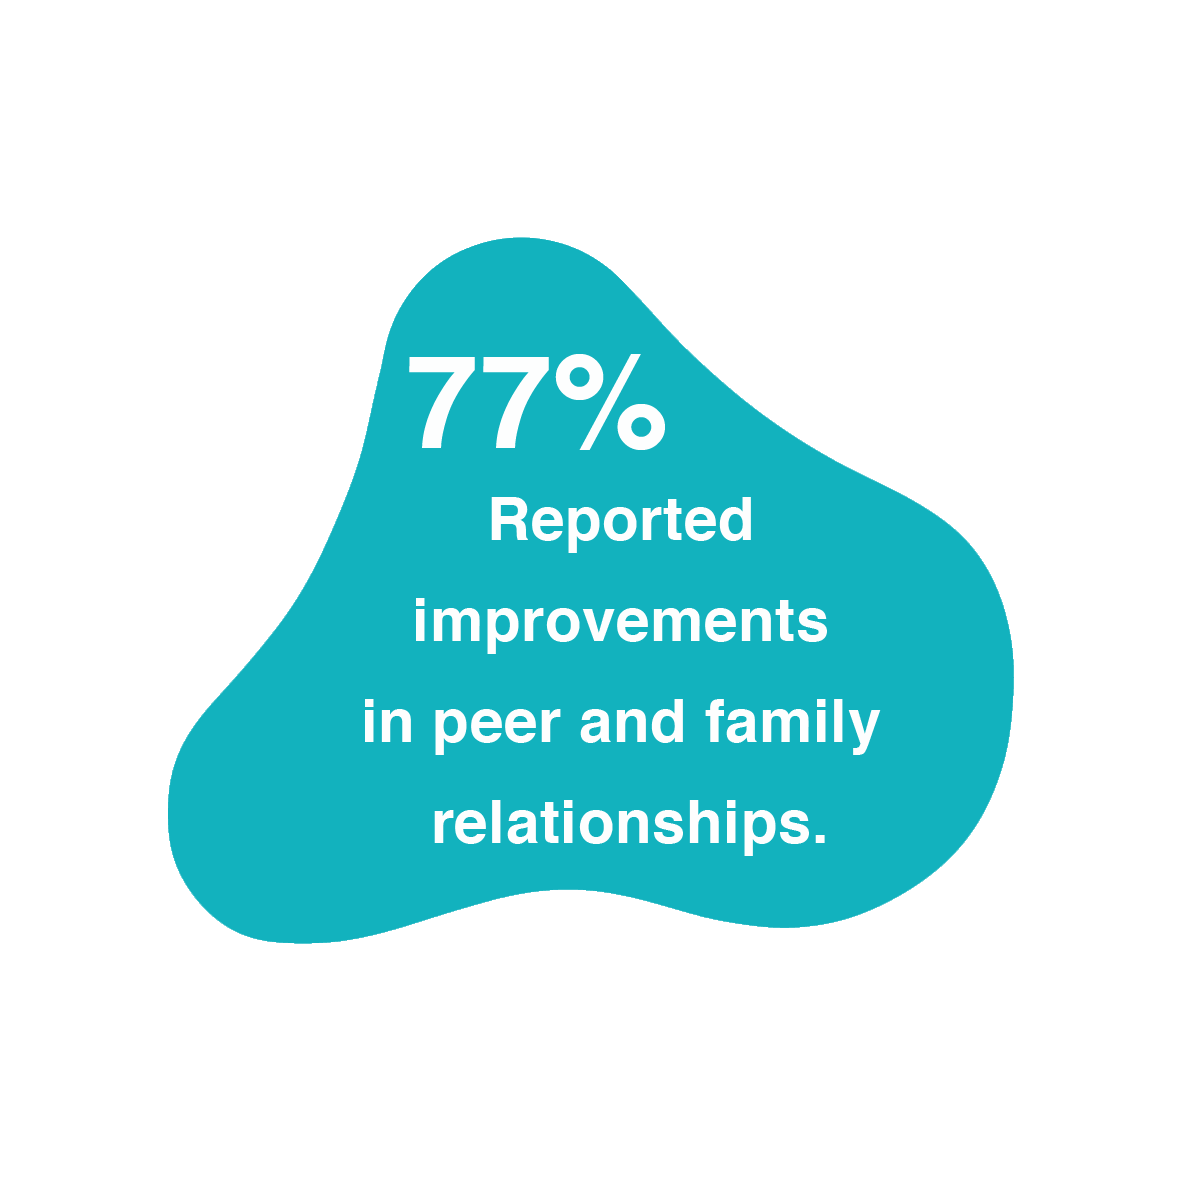 77% reported improvements in peer and family relationships.